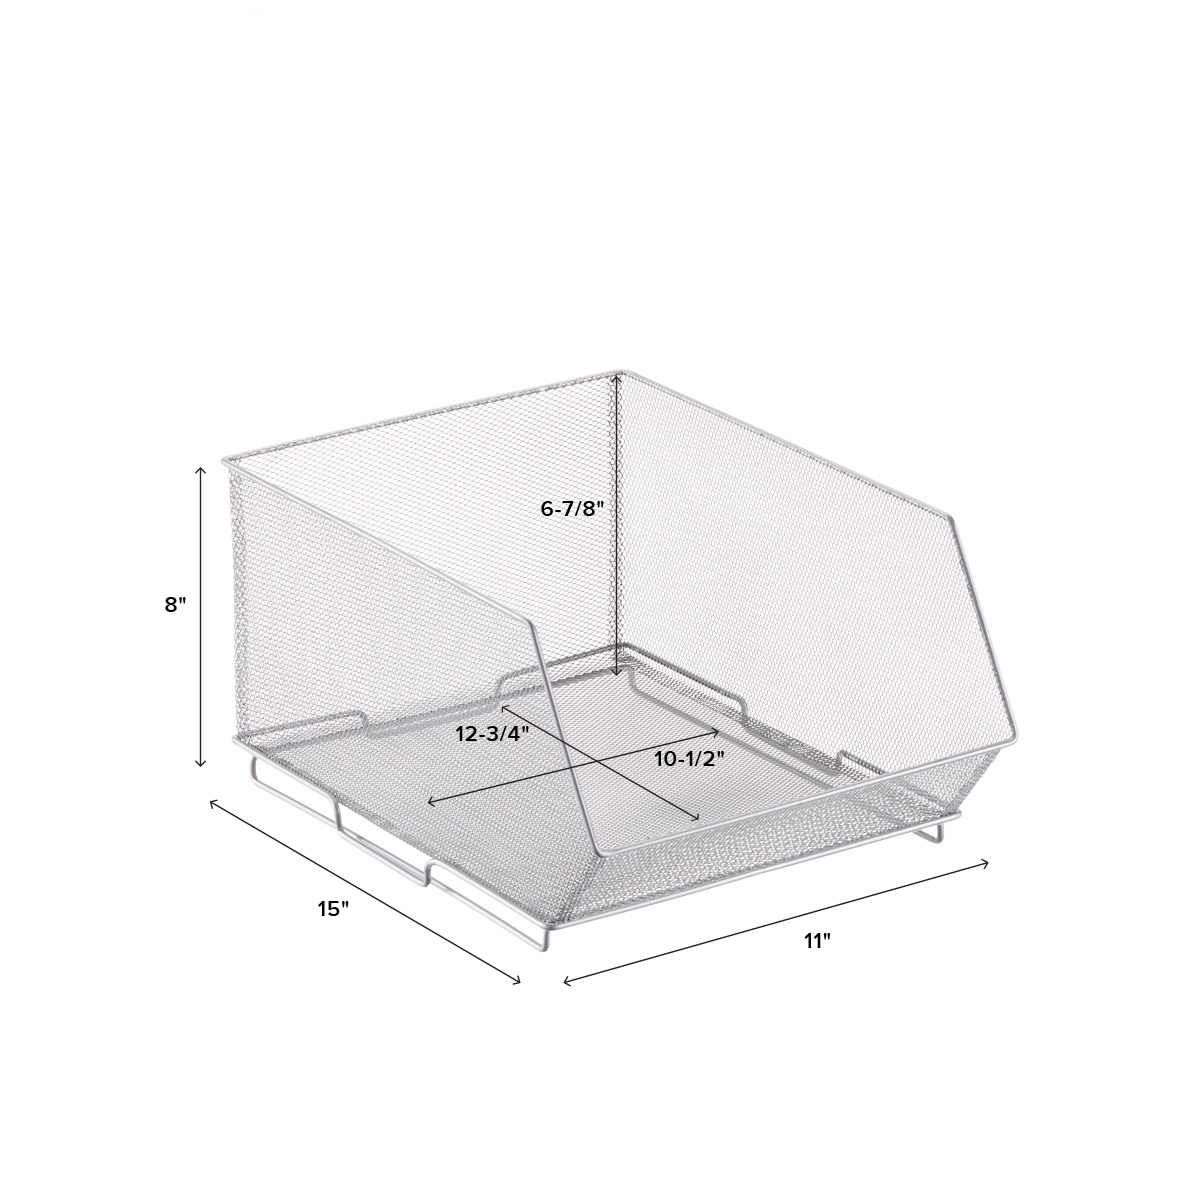 https://www.containerstore.com/catalogimages/411611/10029378-open-front-mesh-stacking-bi.jpg